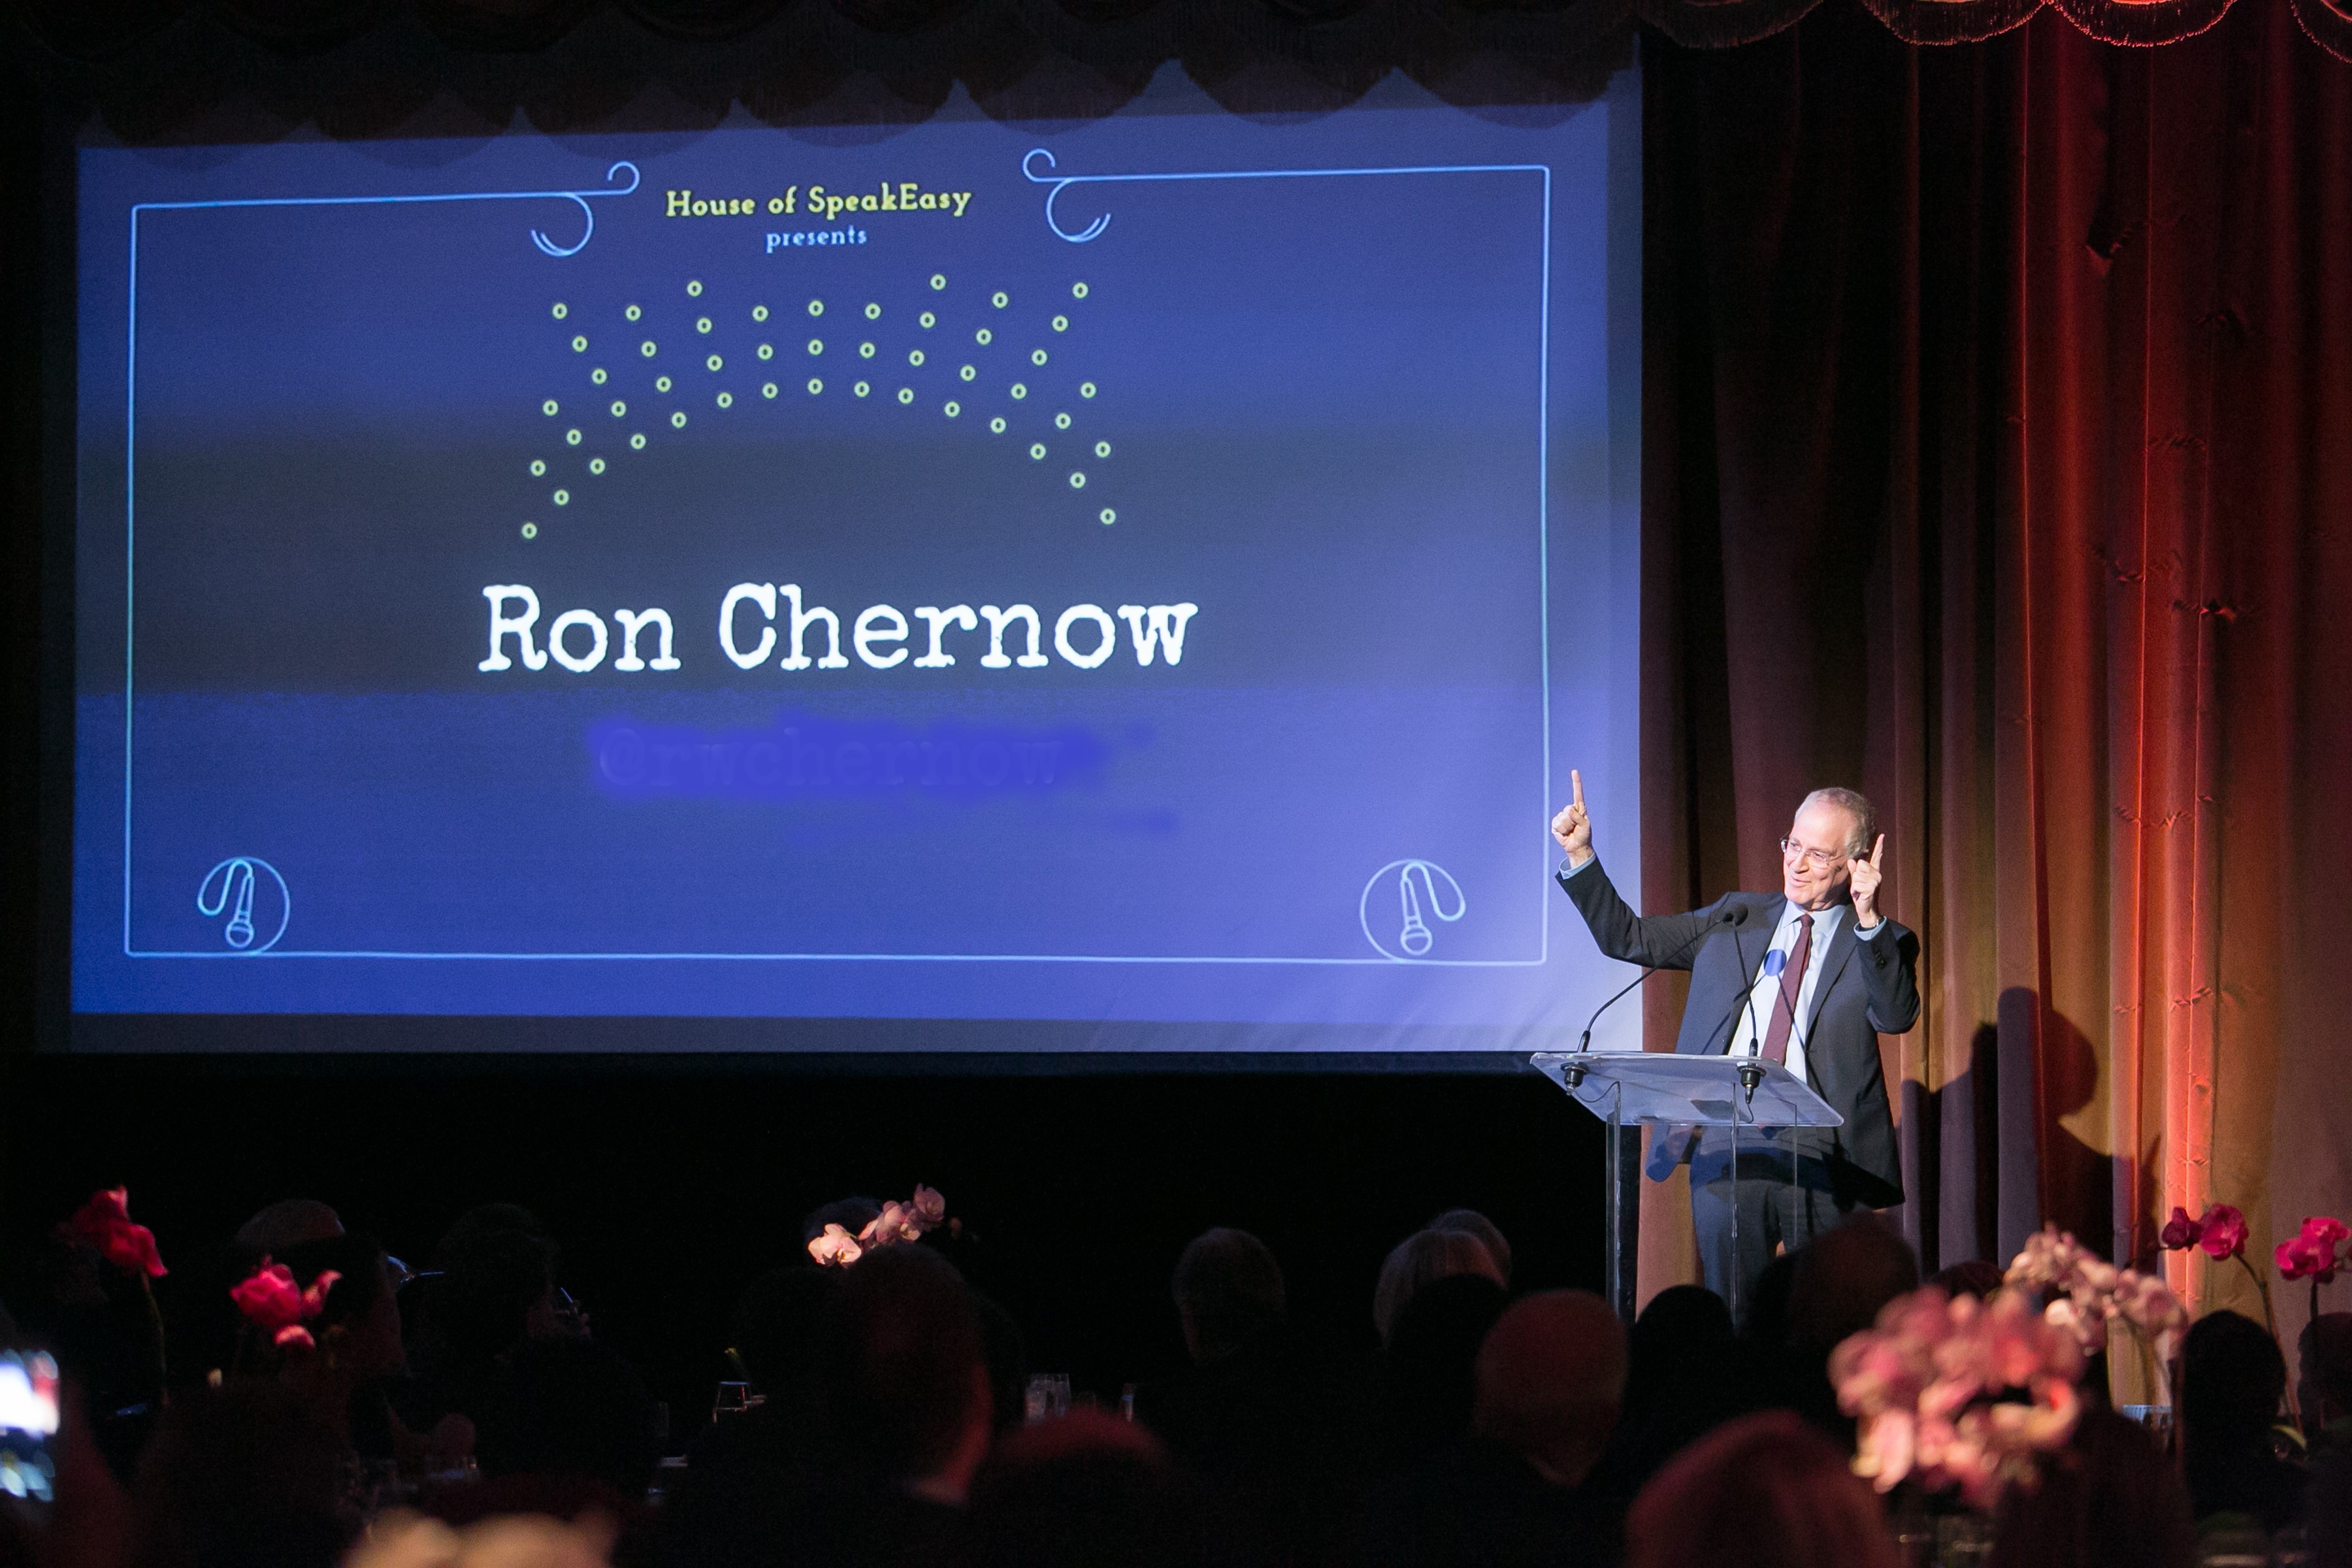 Award-winning biographer and author of ALEXANDER HAMILTON, Ron Chernow, speaking at the House of SpeakEasy gala, February 26th  Photo credit: Beowulf Sheehan